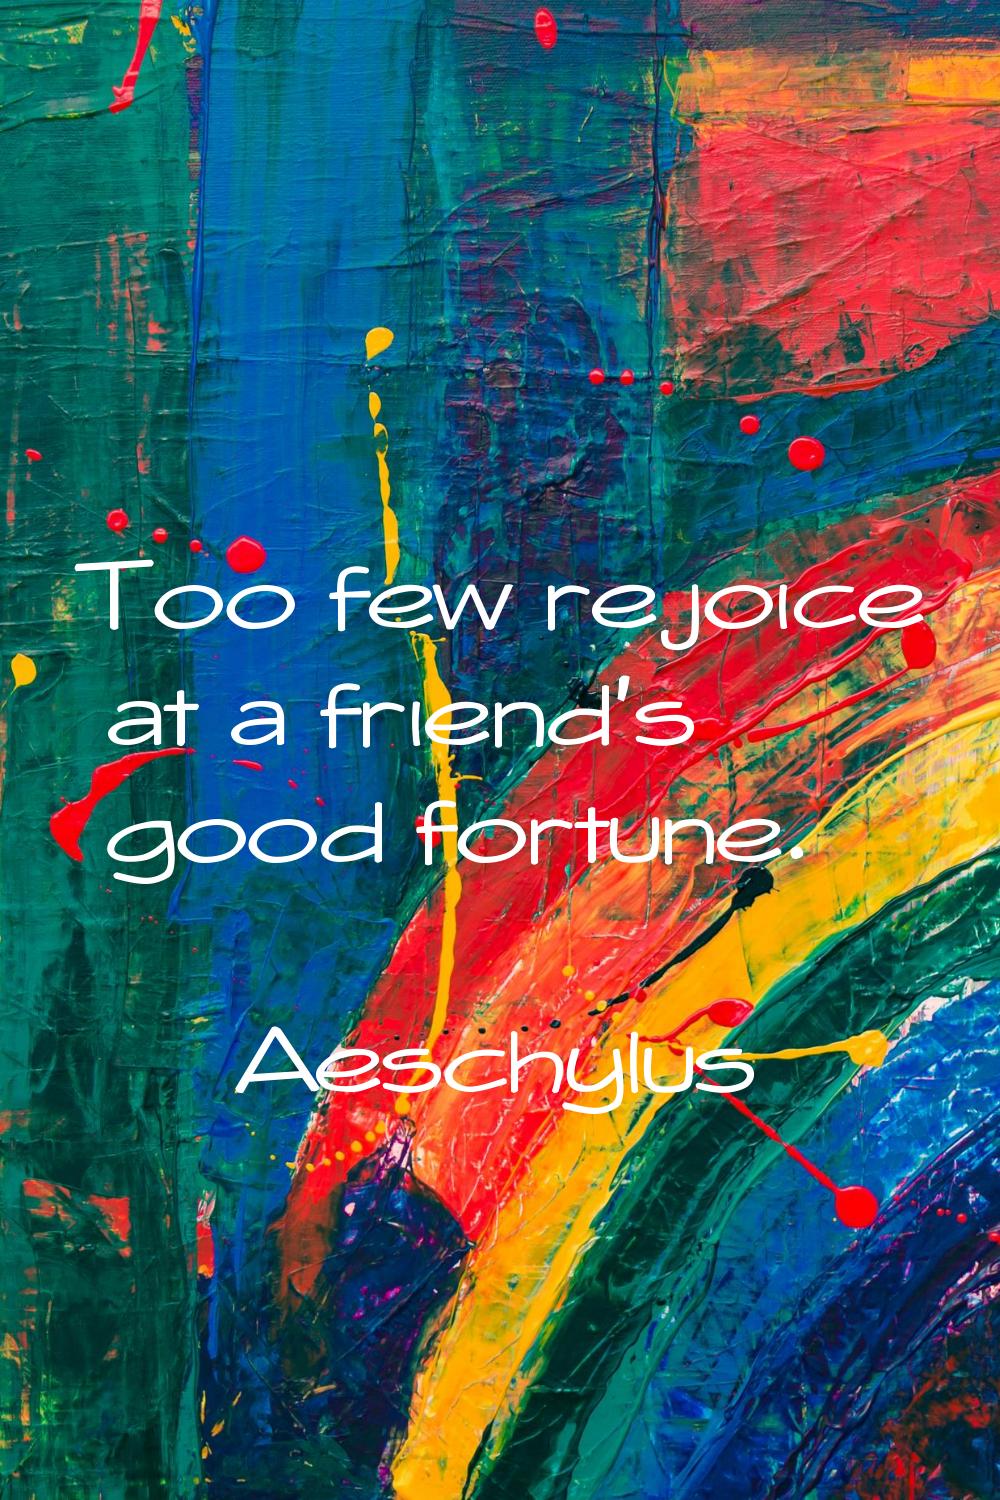 Too few rejoice at a friend's good fortune.